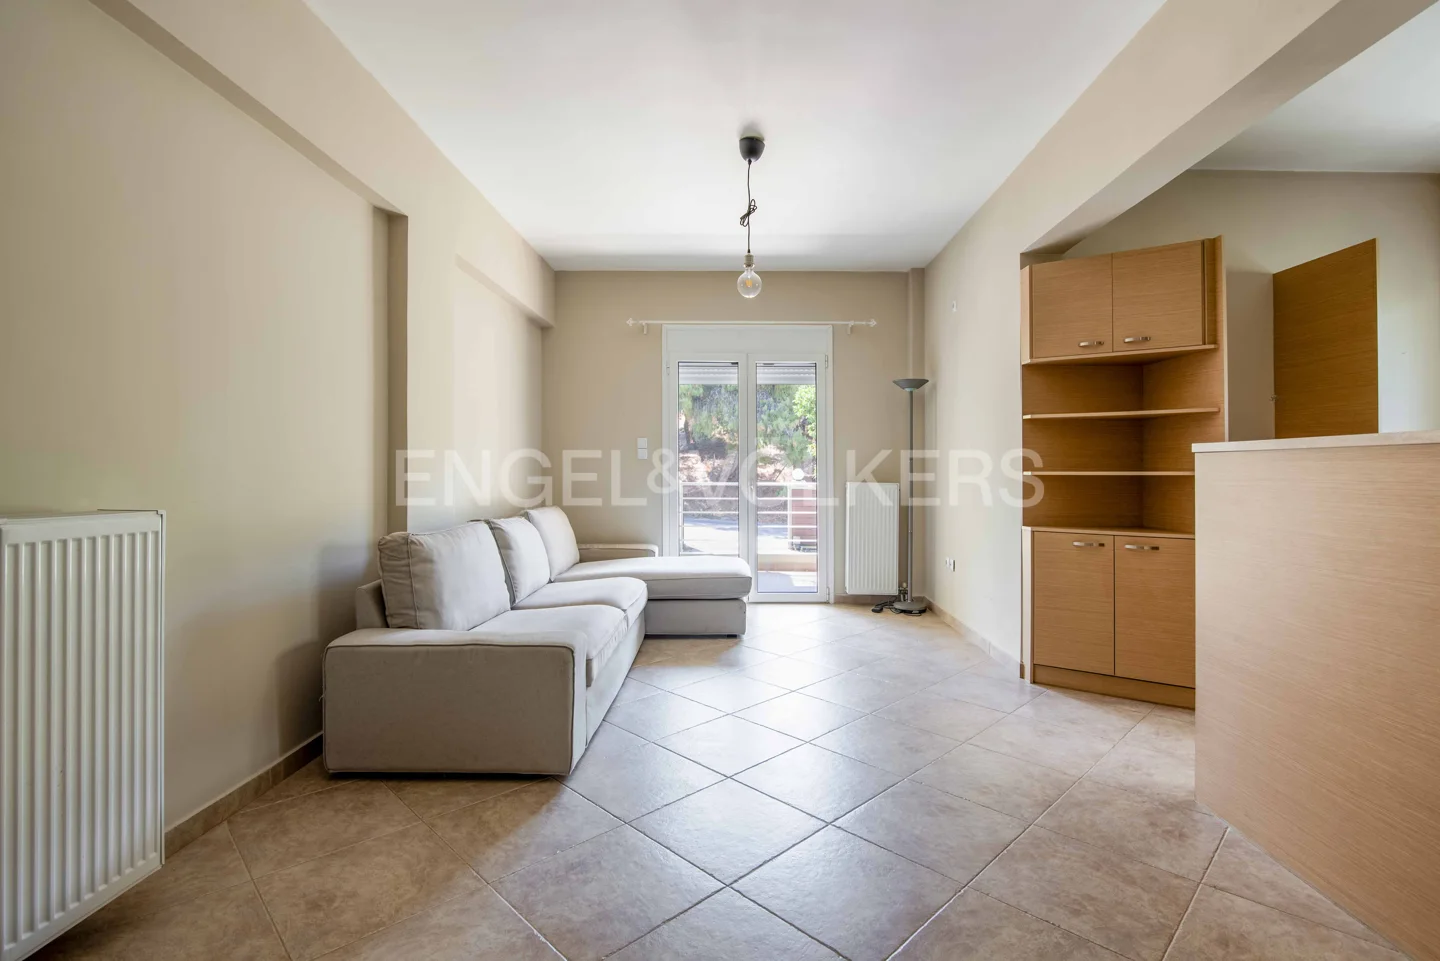 ONE BEDROOM INVESTMENT APARTMENT IN VOULIAGMENI ΙΙ